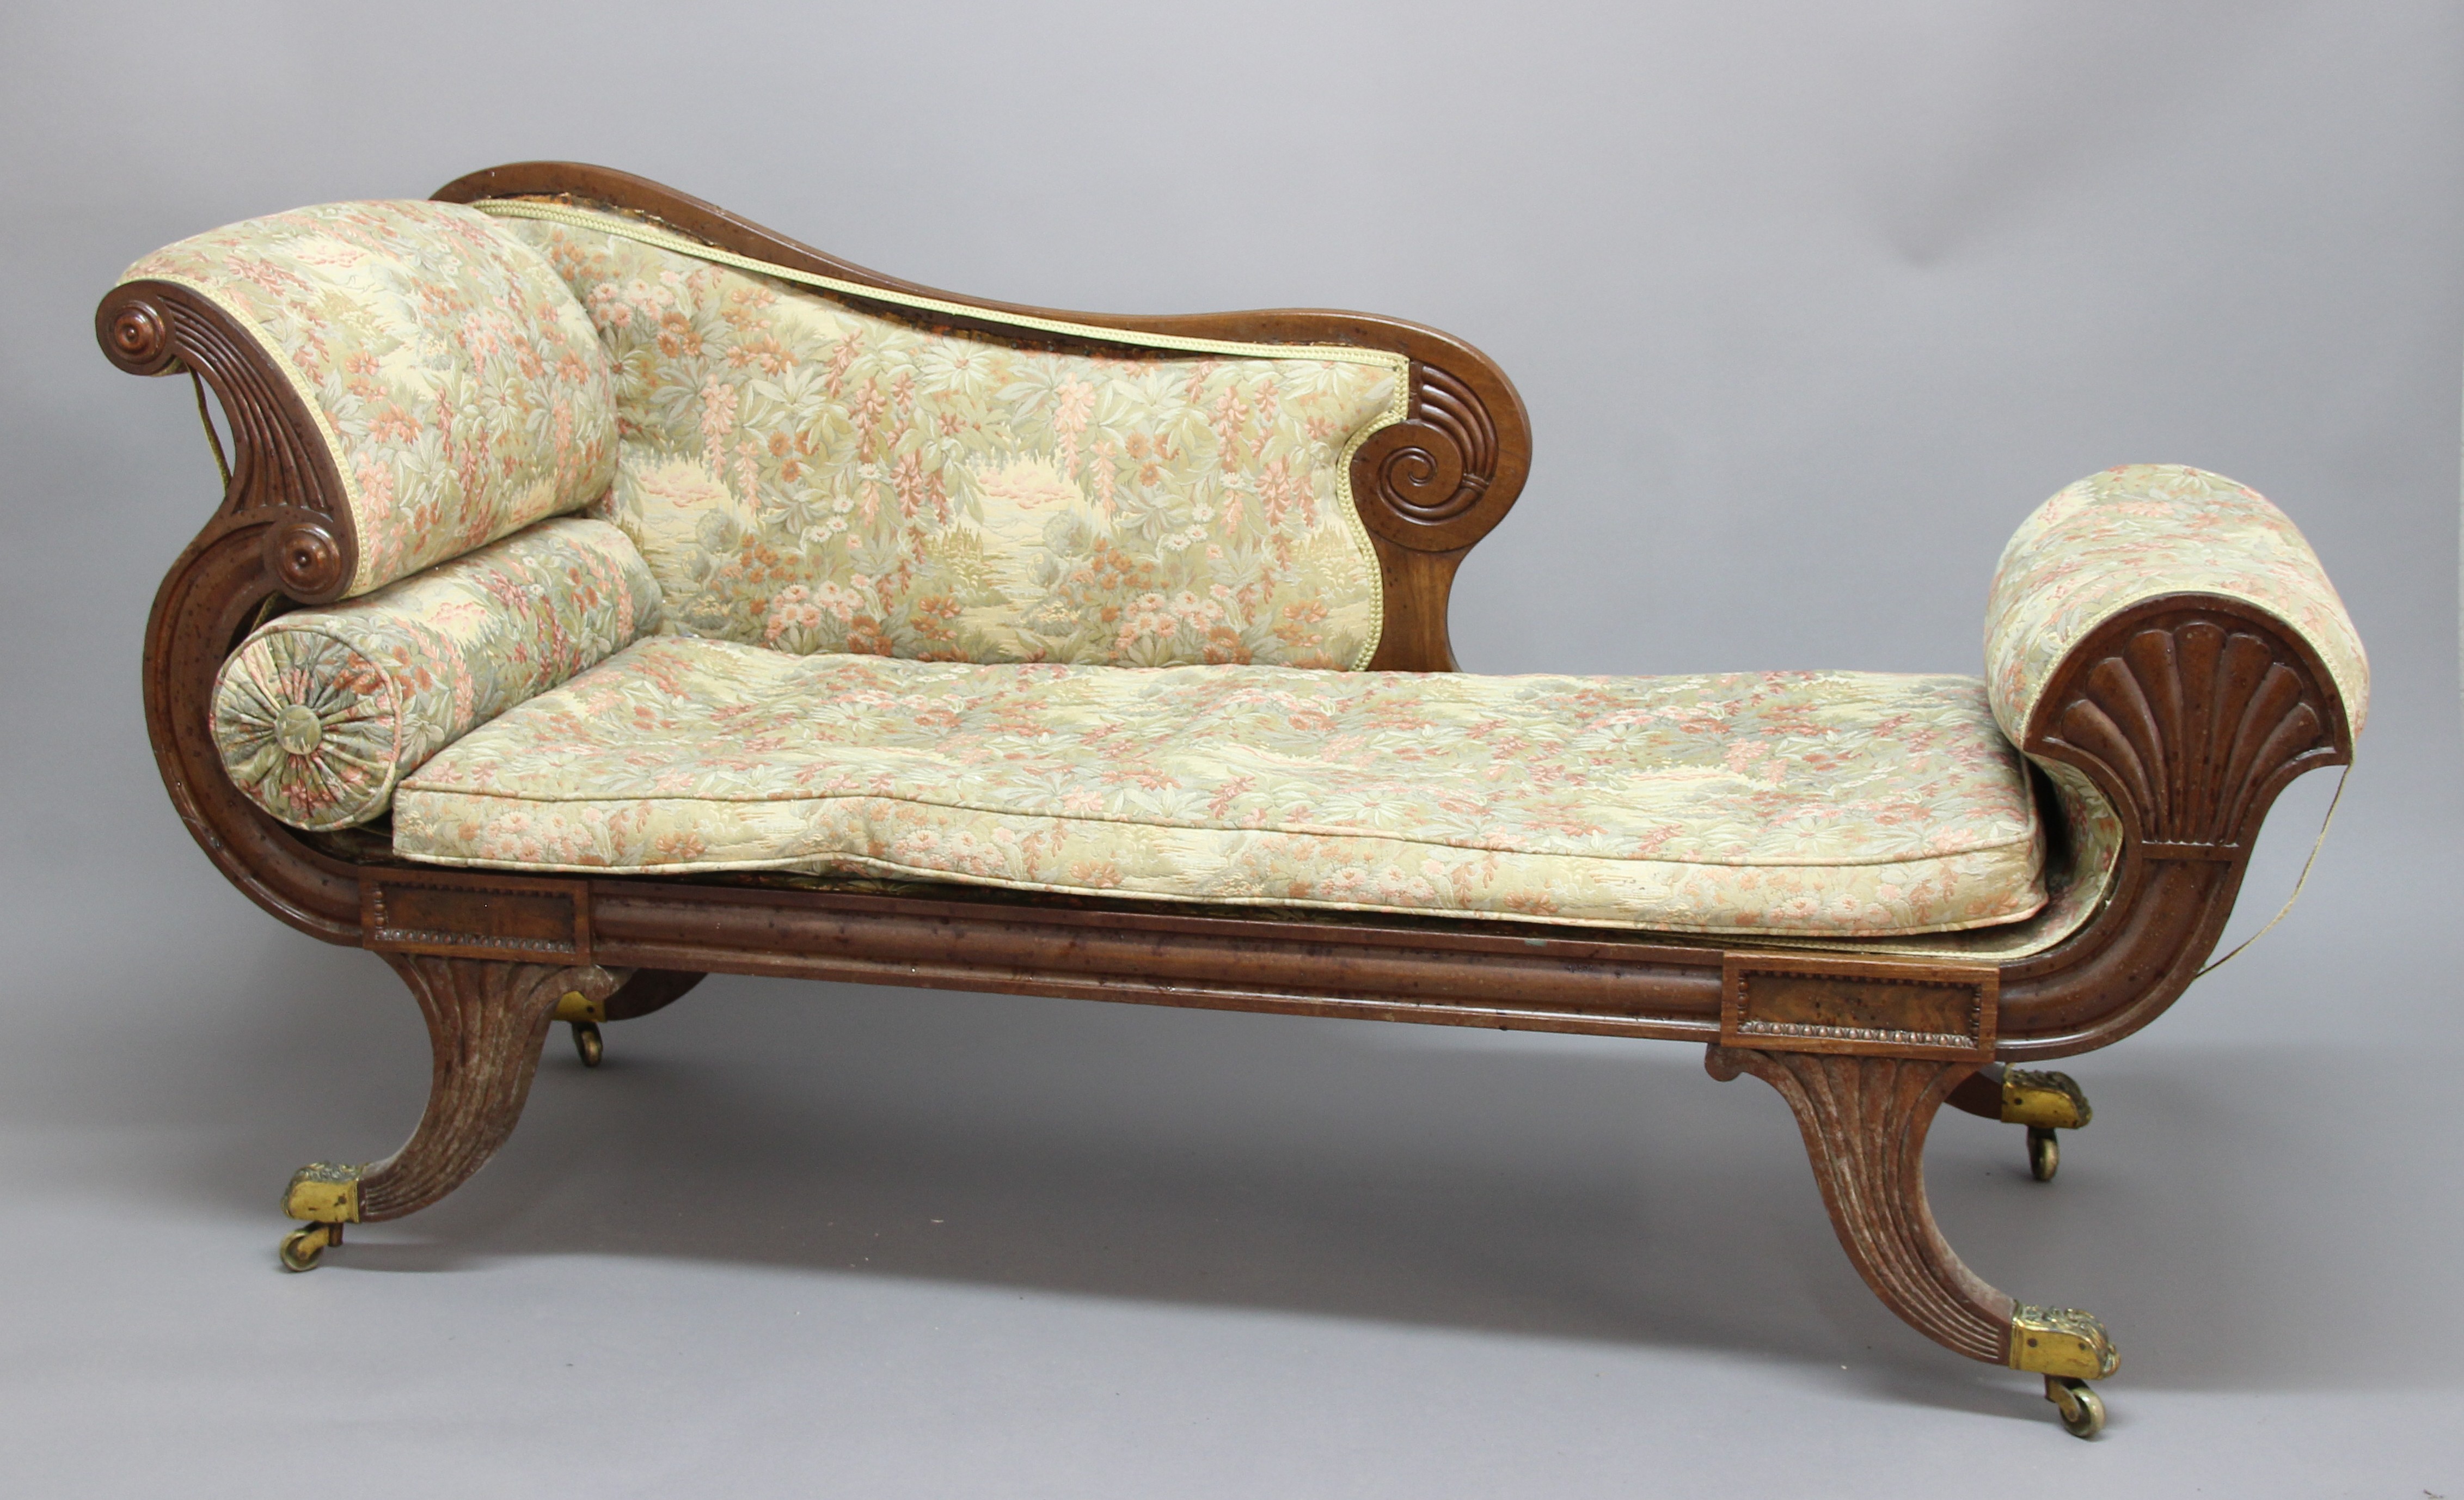 REGENCY MAHOGANY CHAISE LONGUE, with a scrolling back rest, arms and legs, height 90cm, width 178cm,